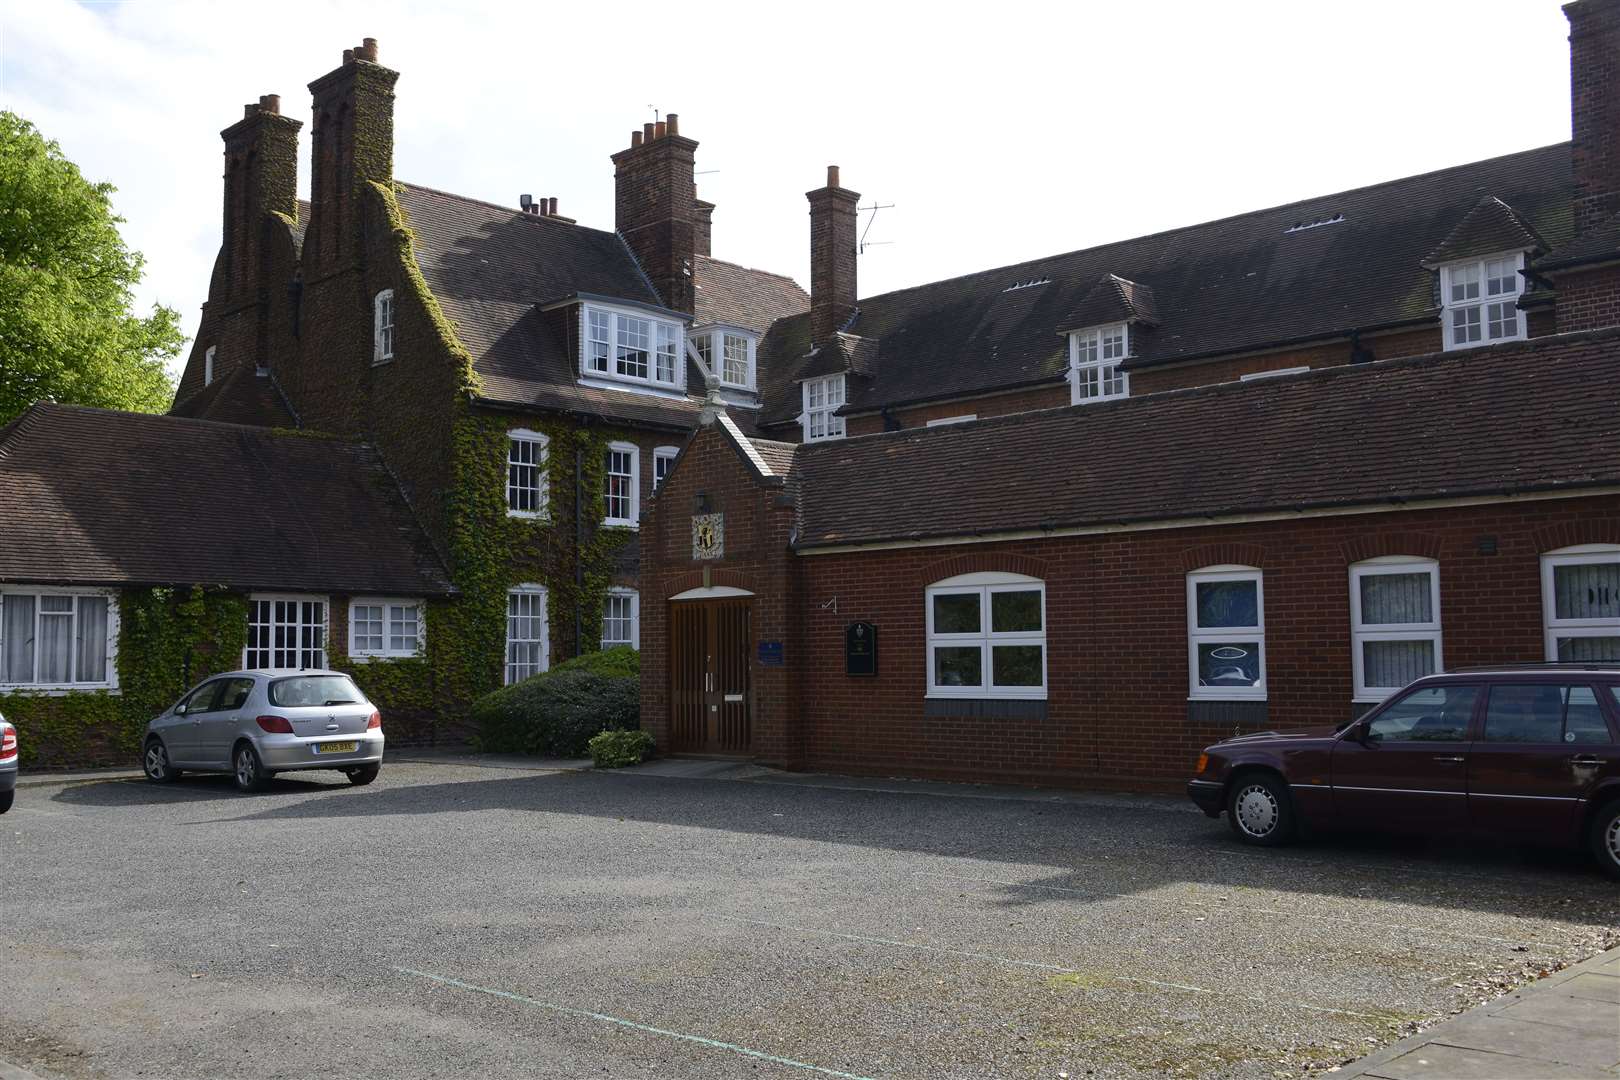 Sir Roger Manwood's School in Sandwich will close its boarding facility